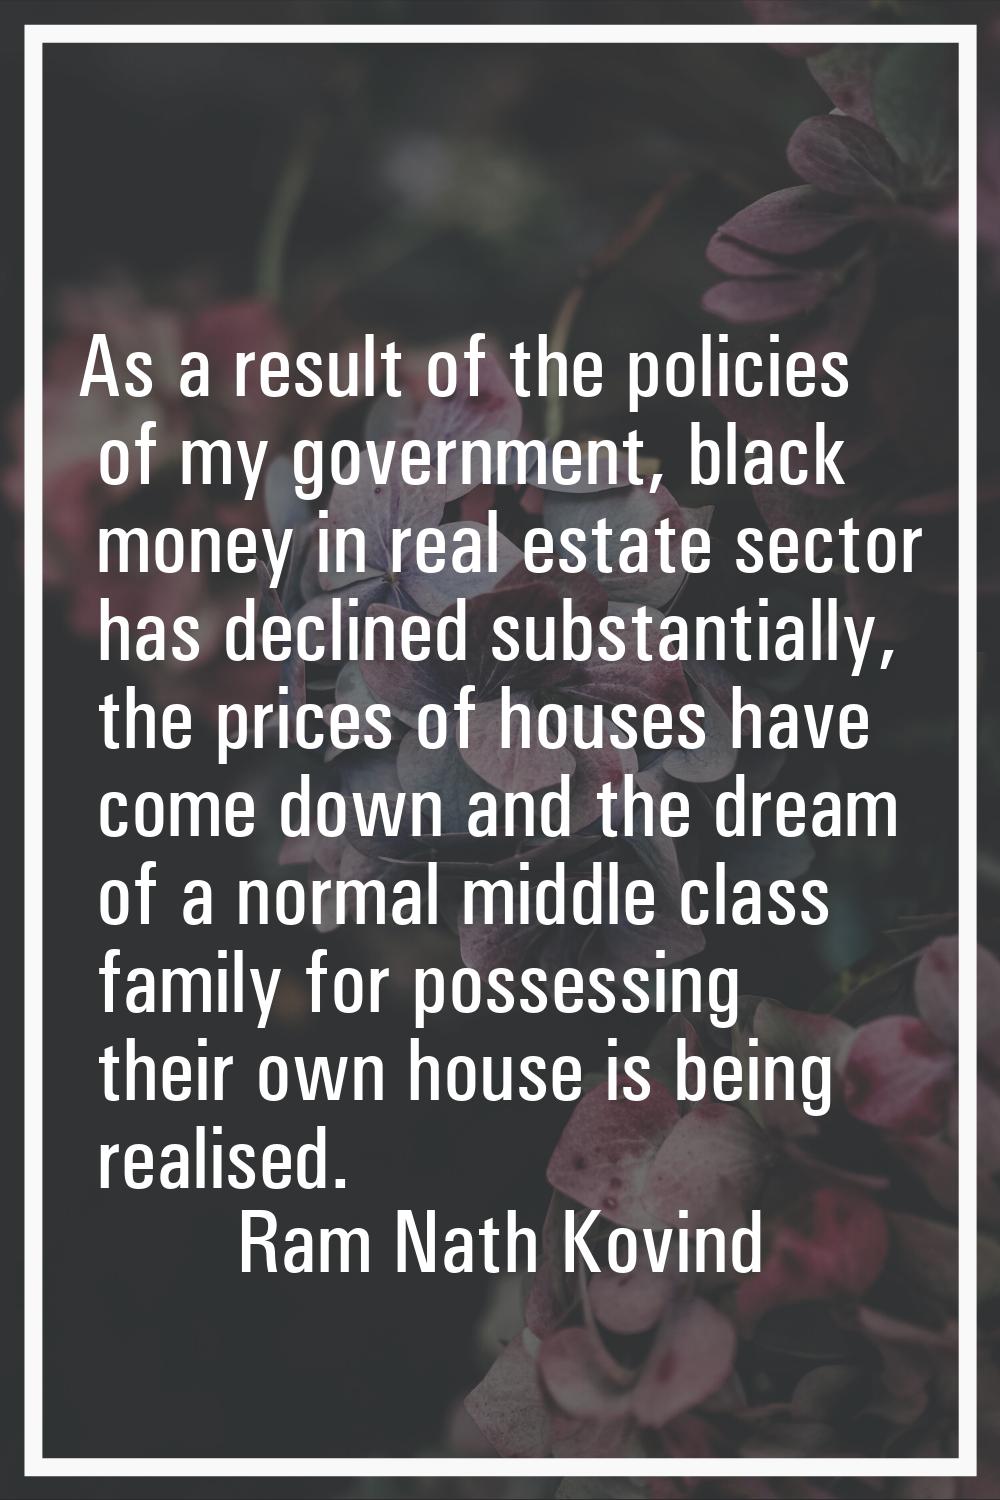 As a result of the policies of my government, black money in real estate sector has declined substa